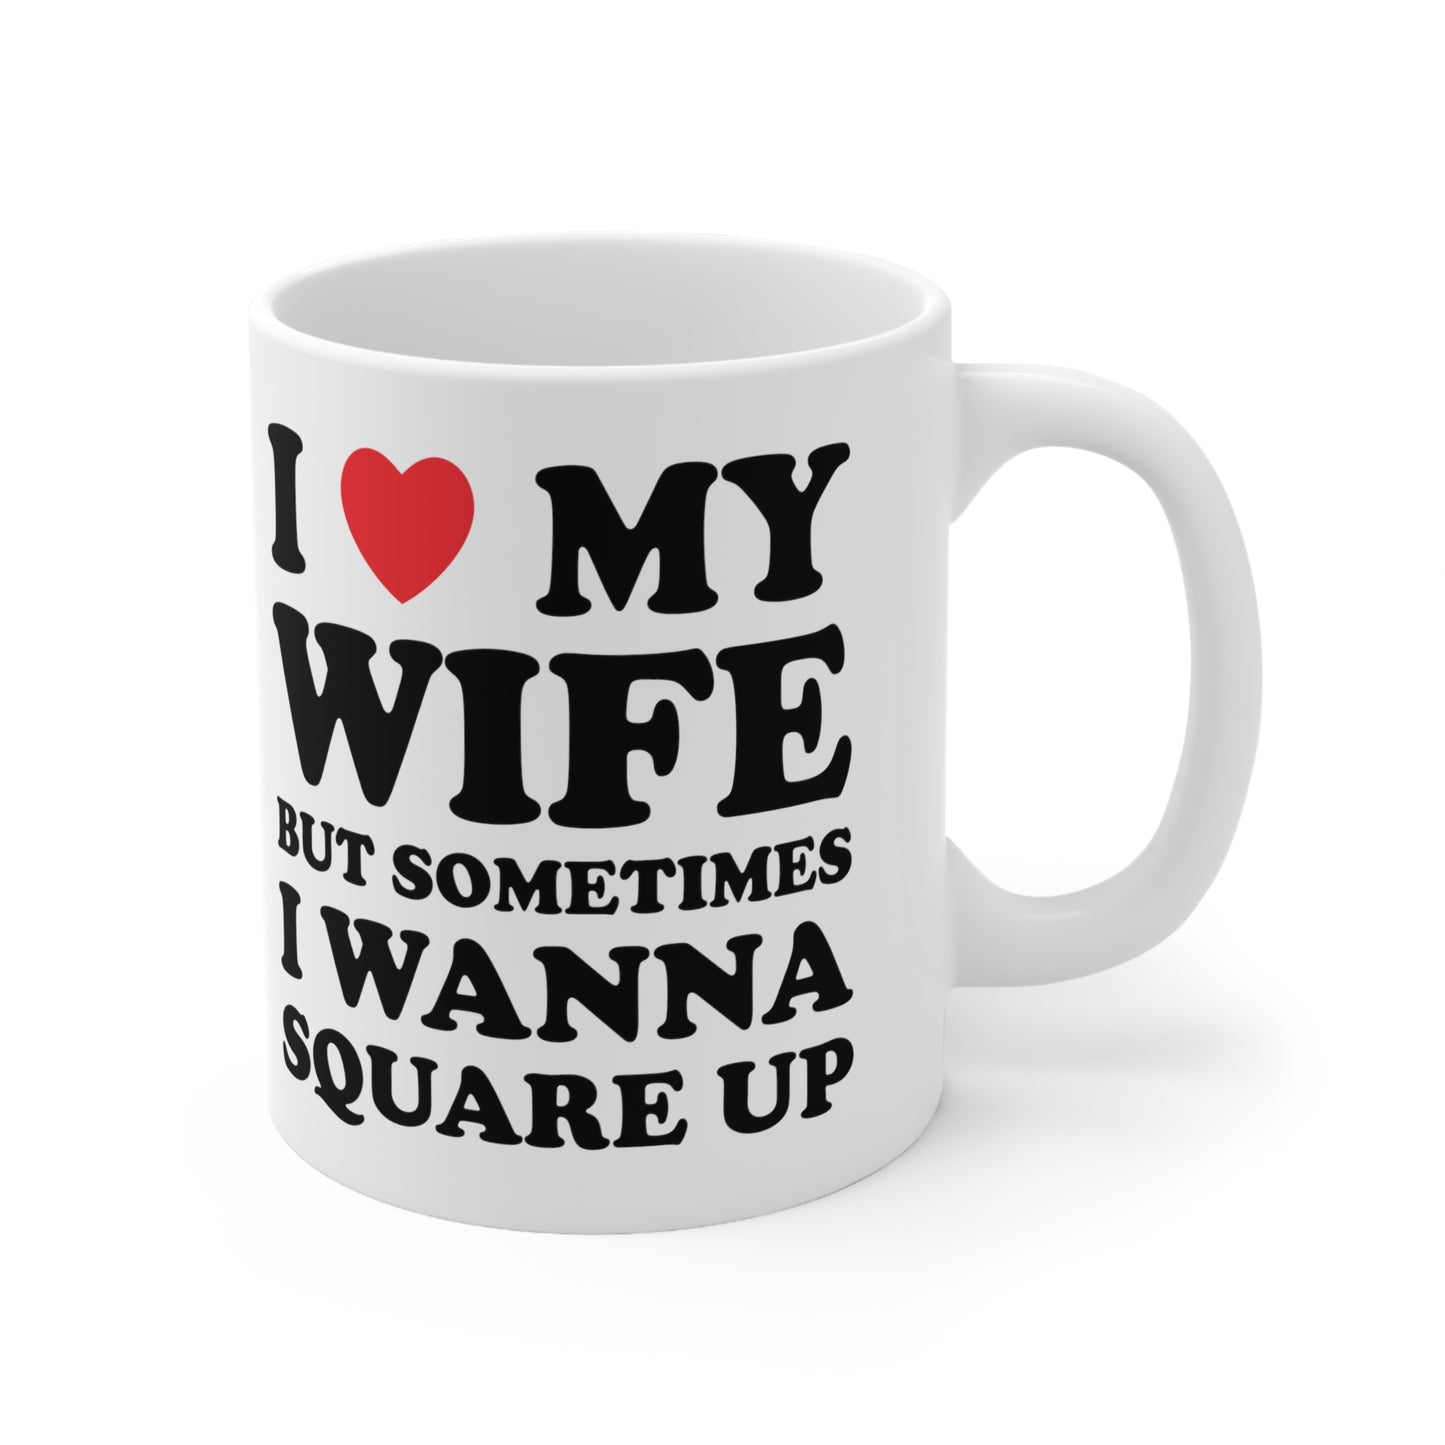 I Love My Wife But Sometimes I Want To Square Up Ceramic Mug 11oz